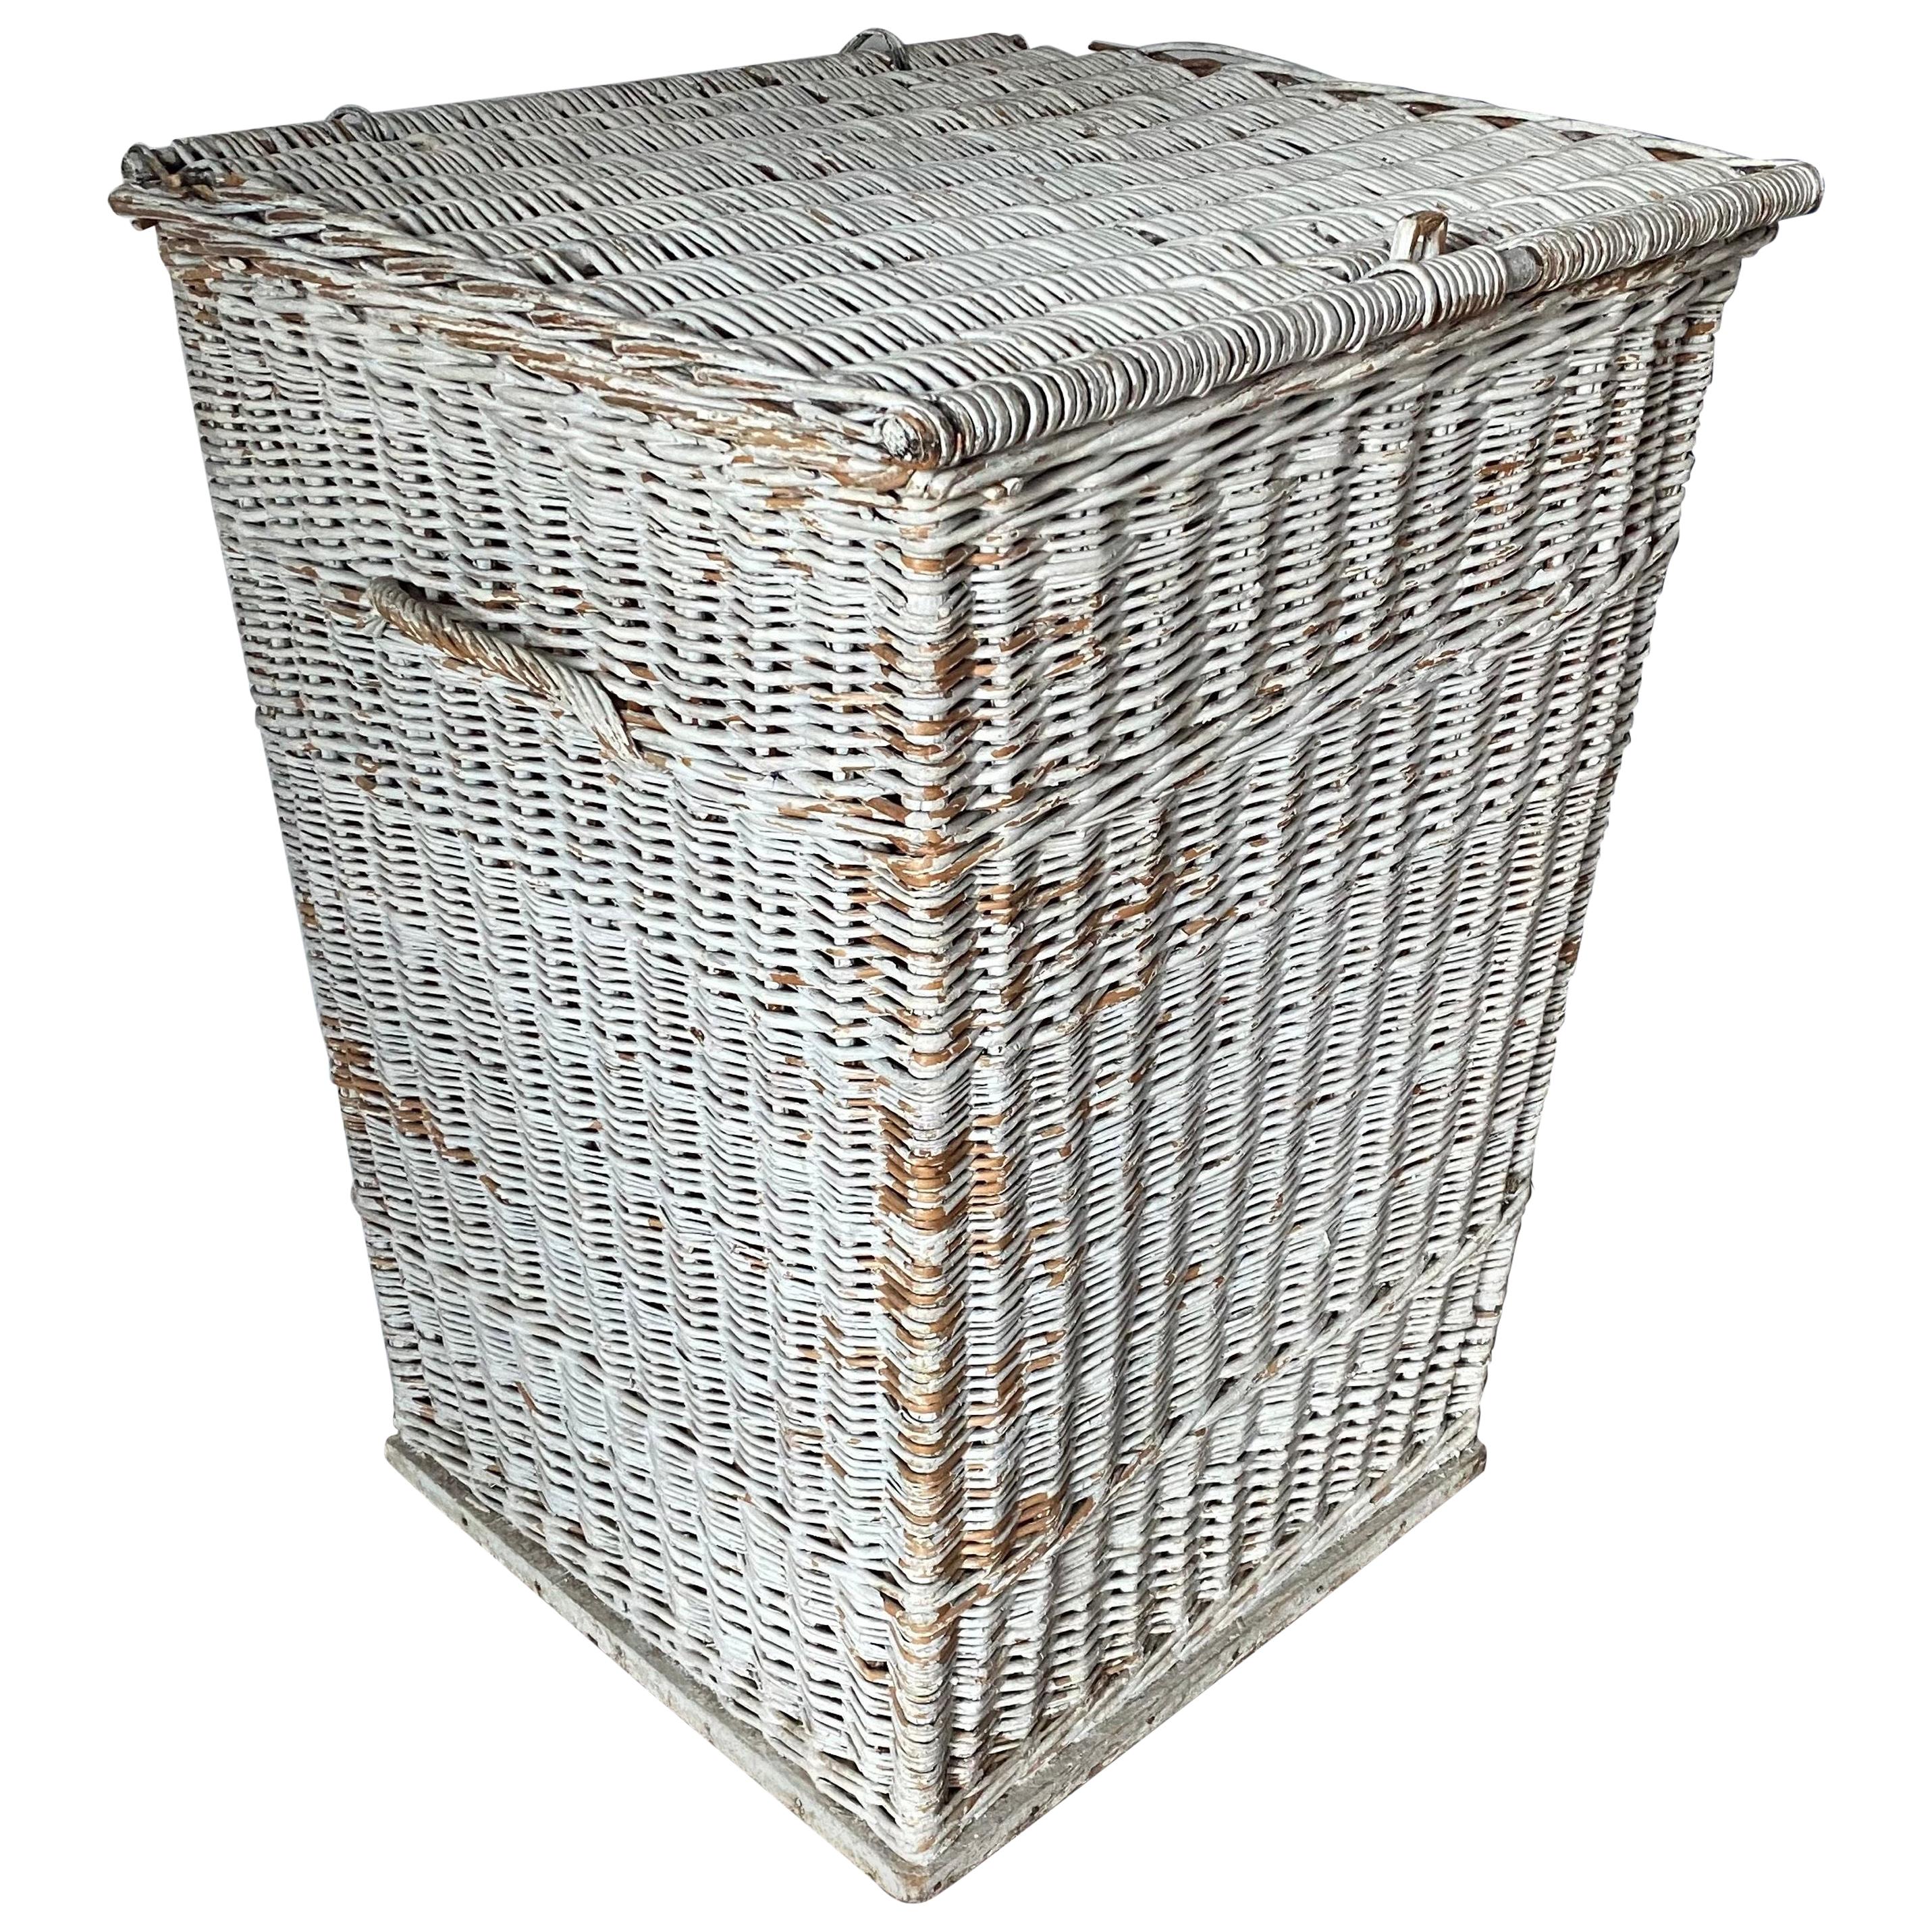 Large Rustic Wicker Basket For Sale